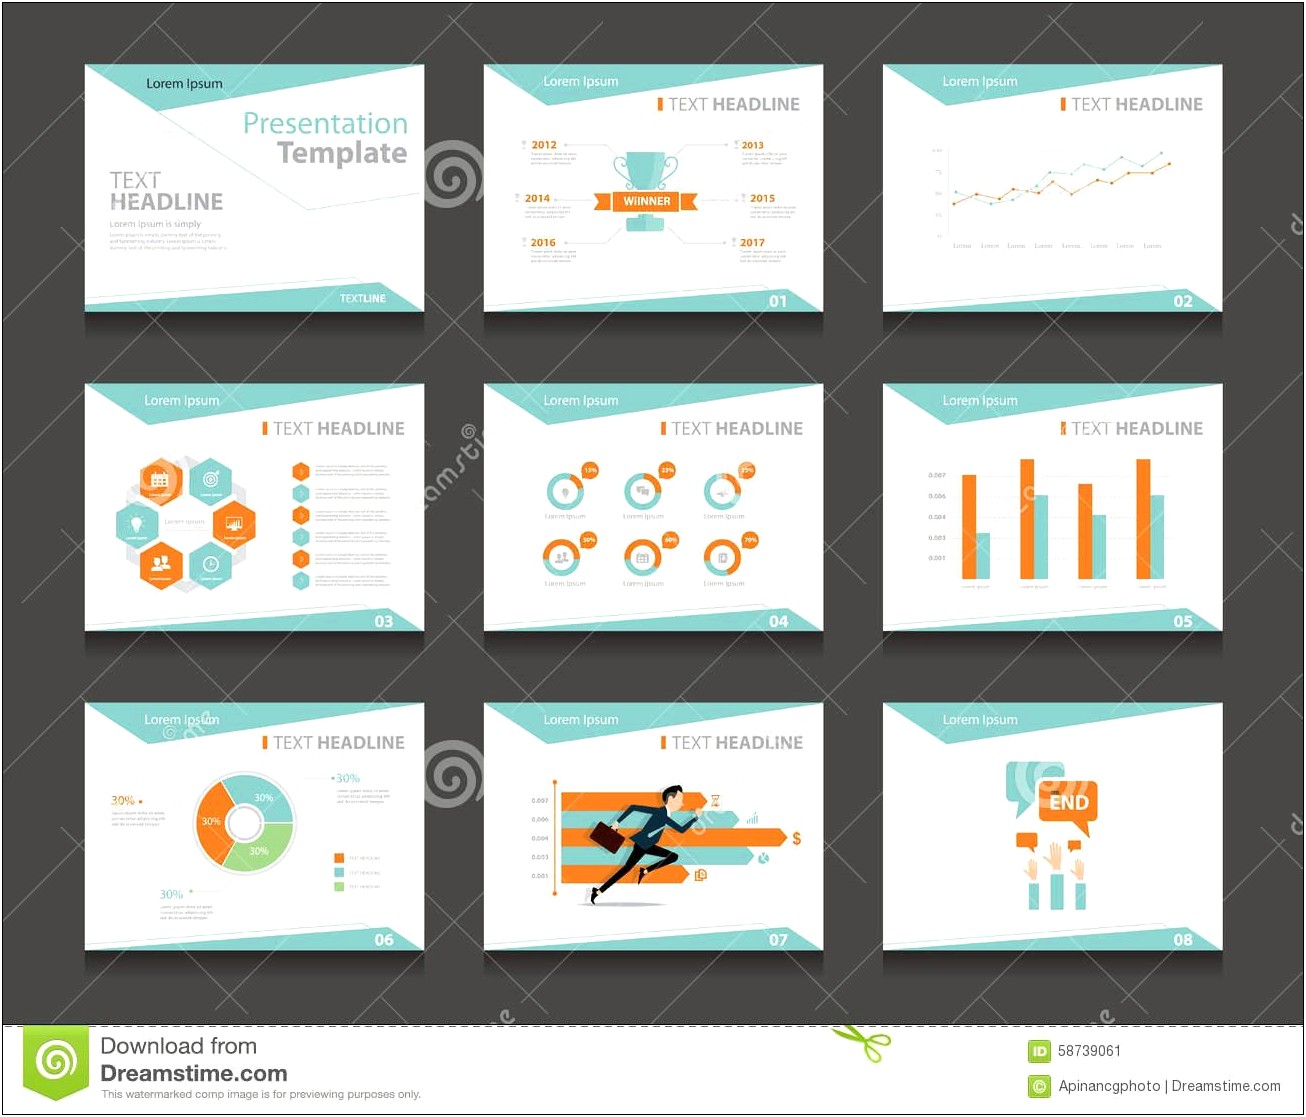 Free Crossing The Chasm Powerpoint Template